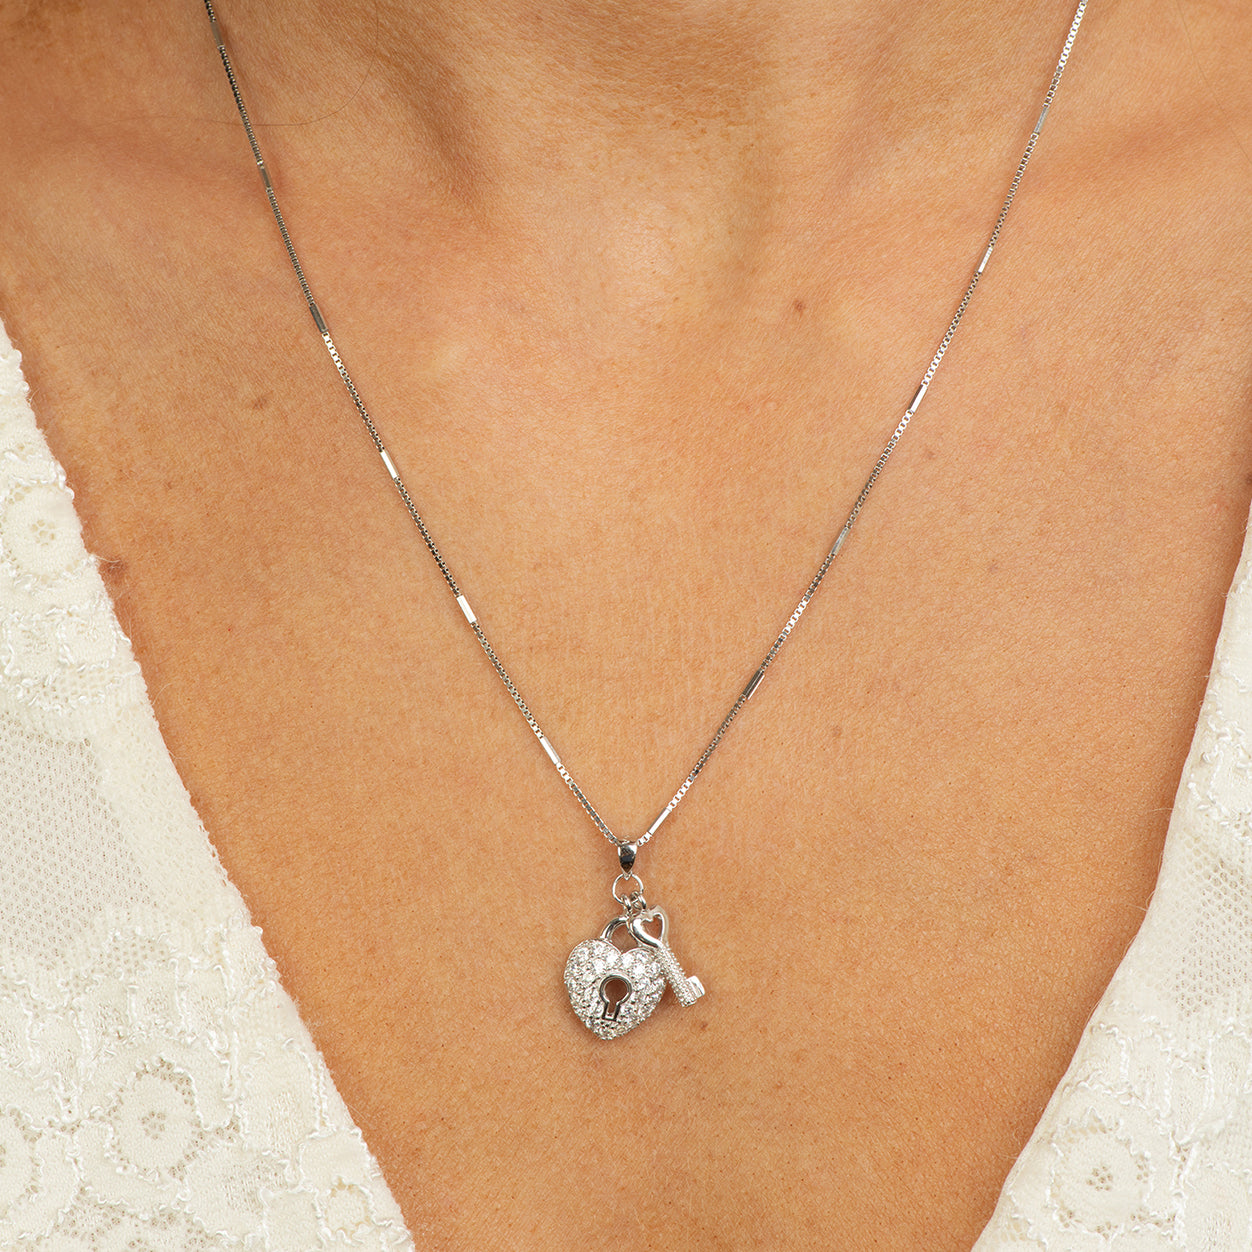 DK-925-433- key to my heart Necklace.